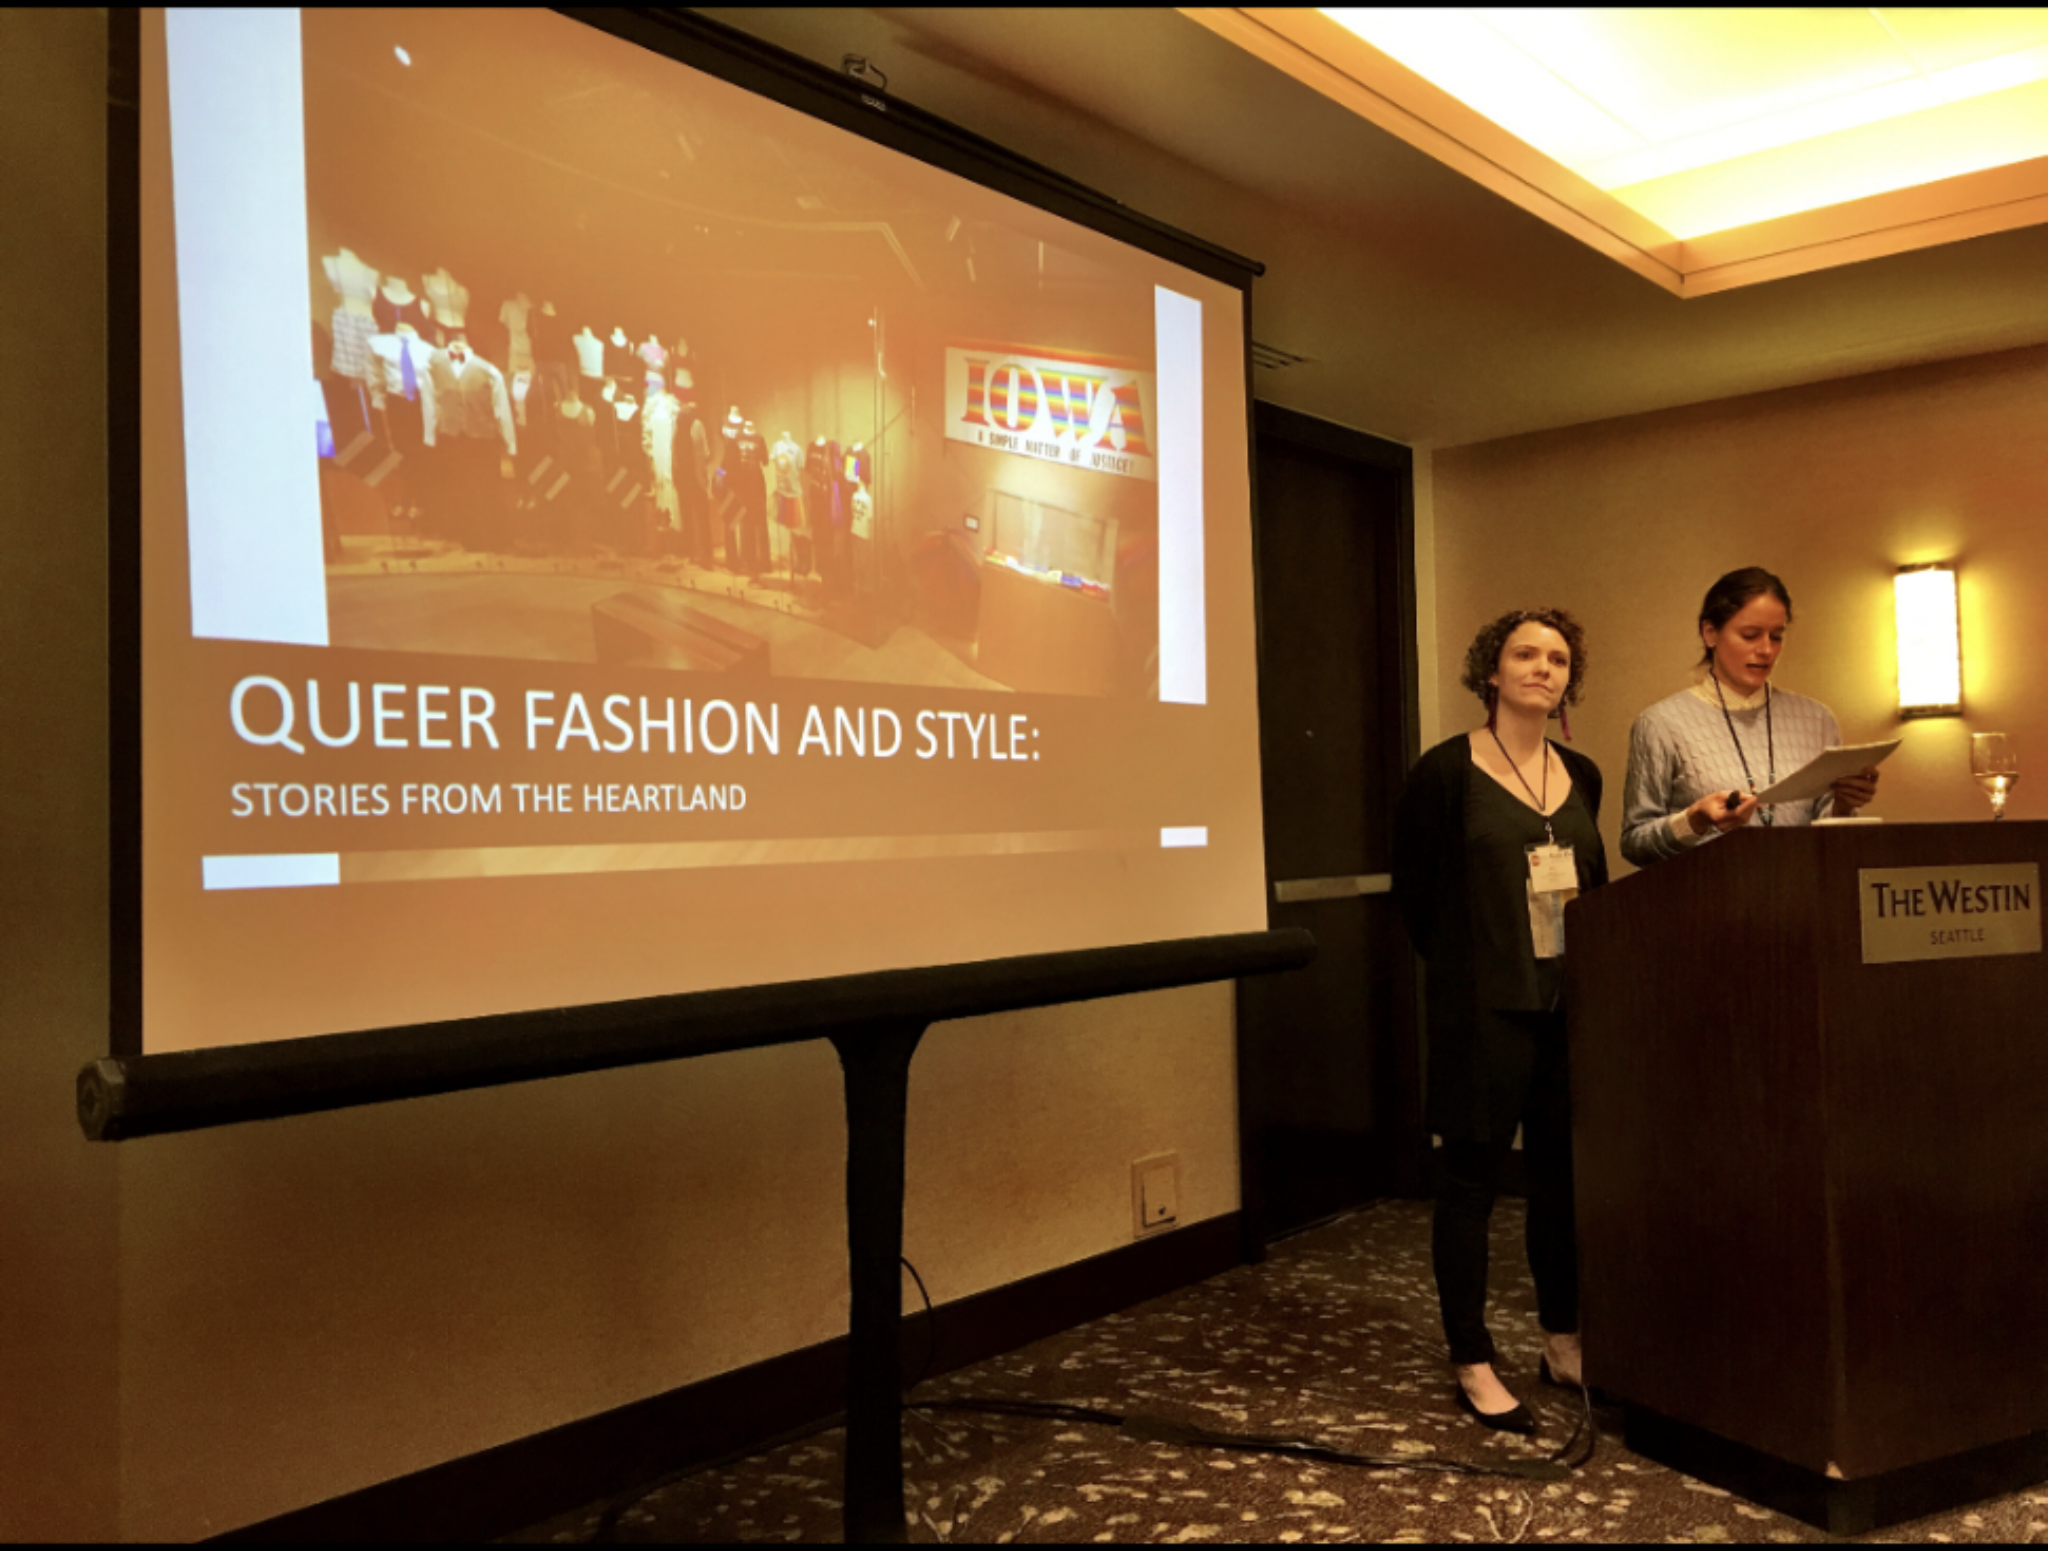 Kelly Reddy-Best (left) and Dana Goodin (right) presenting the paper titled Queer Fashion and Styles: Stories from the Heartland - A Museum Exhibition at the Costume Society of America national conference in 2019 in Seattle, Washington